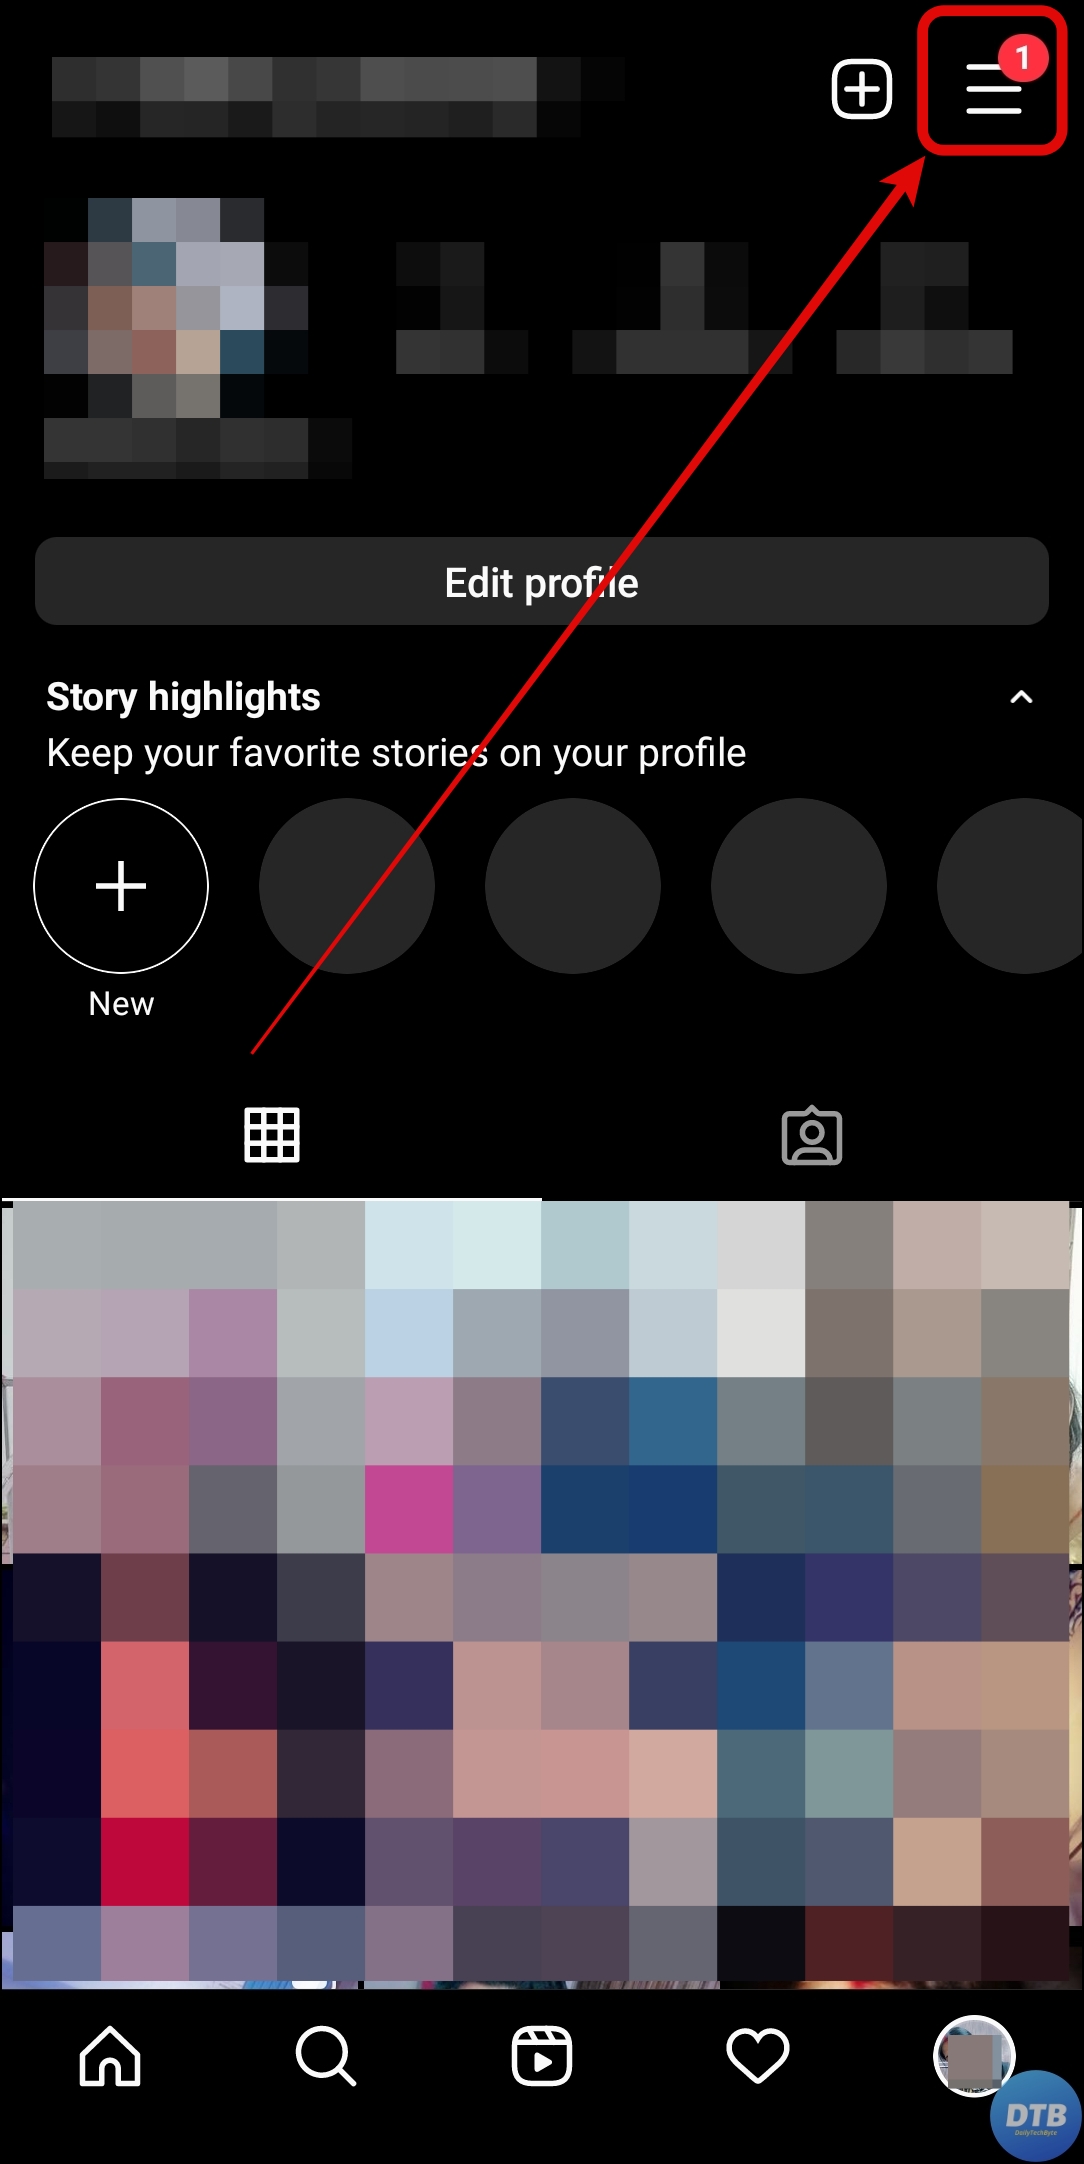 Enable High-Quality Media Uploads to Fix Blurry Video Uploads on Instagram